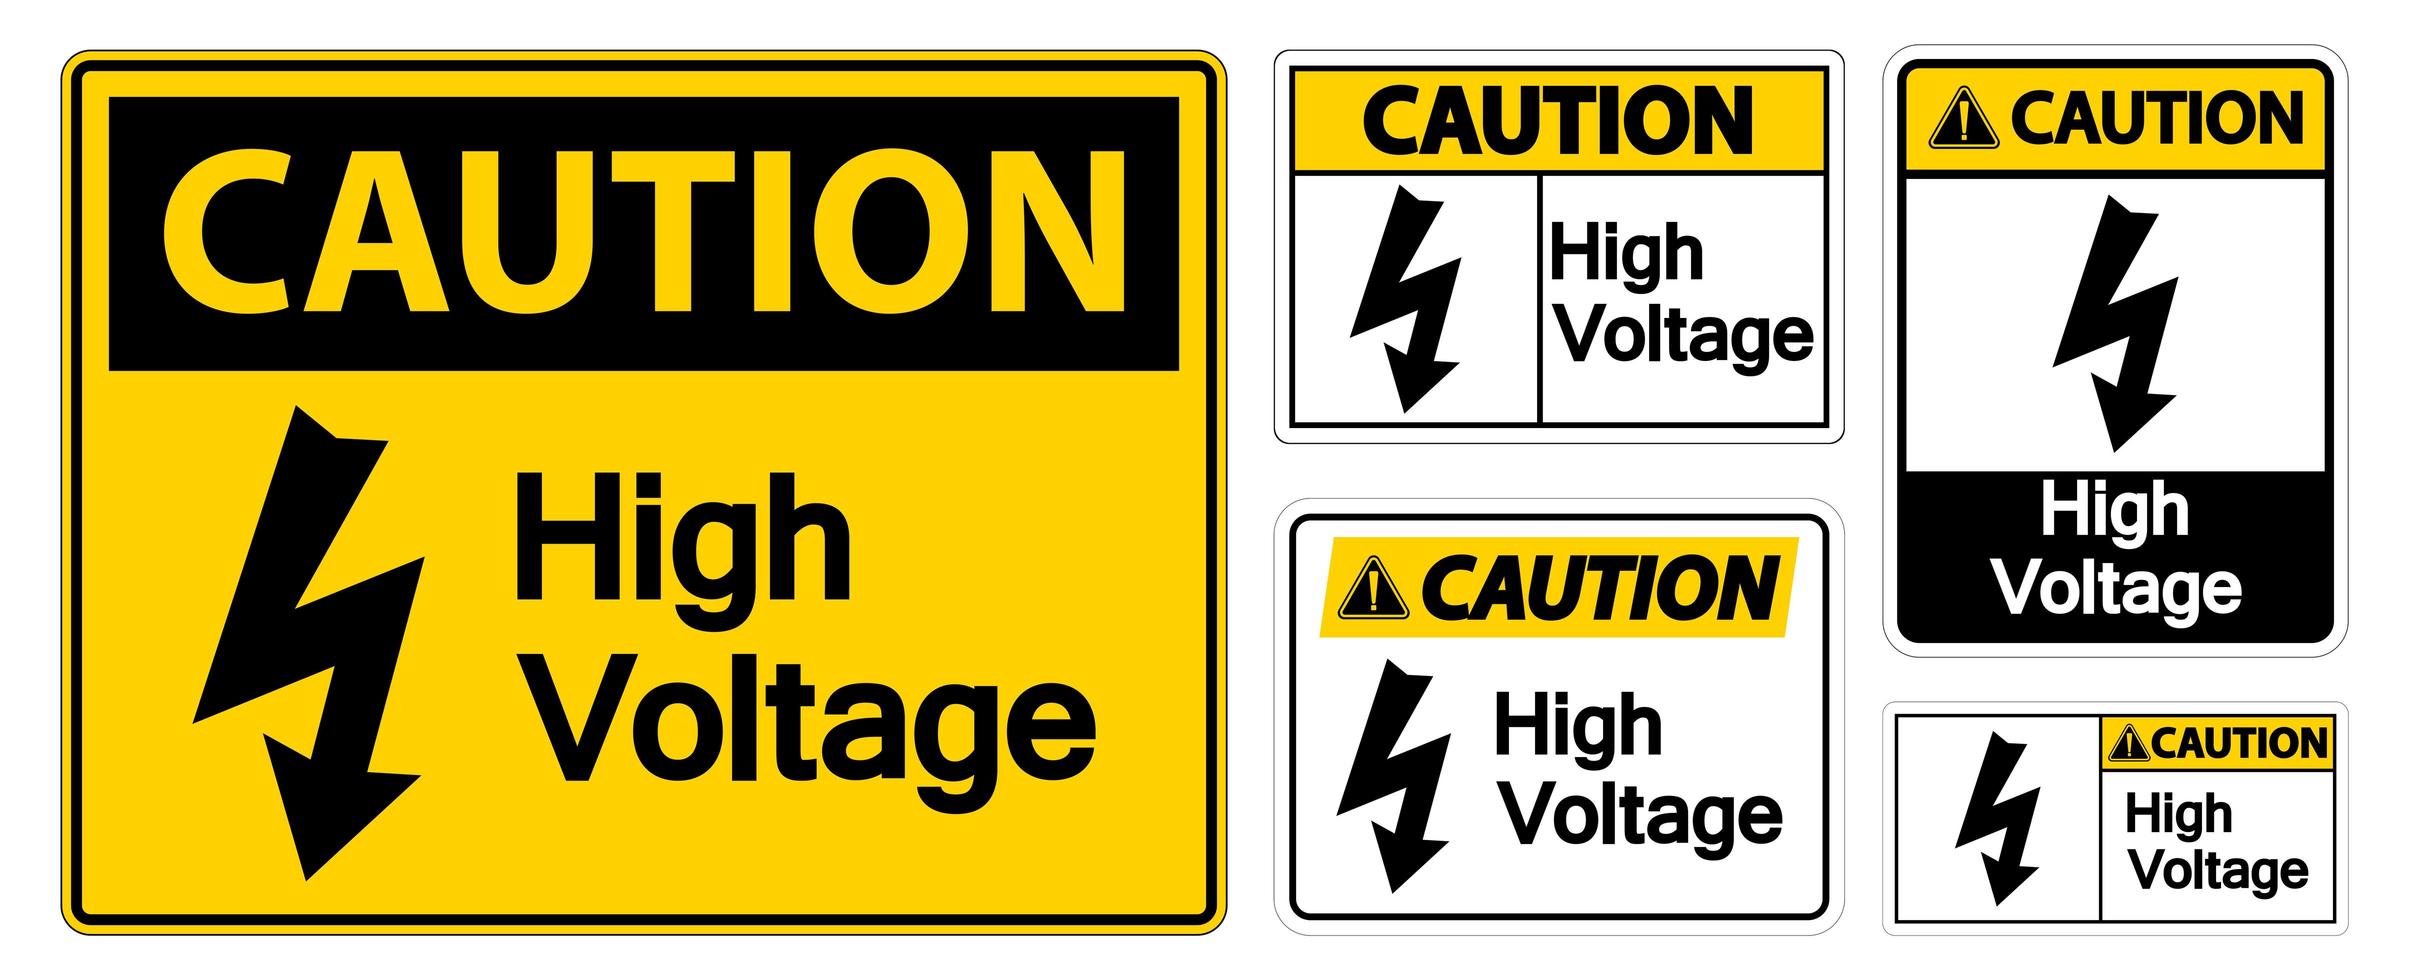 Caution High voltage Sign vector